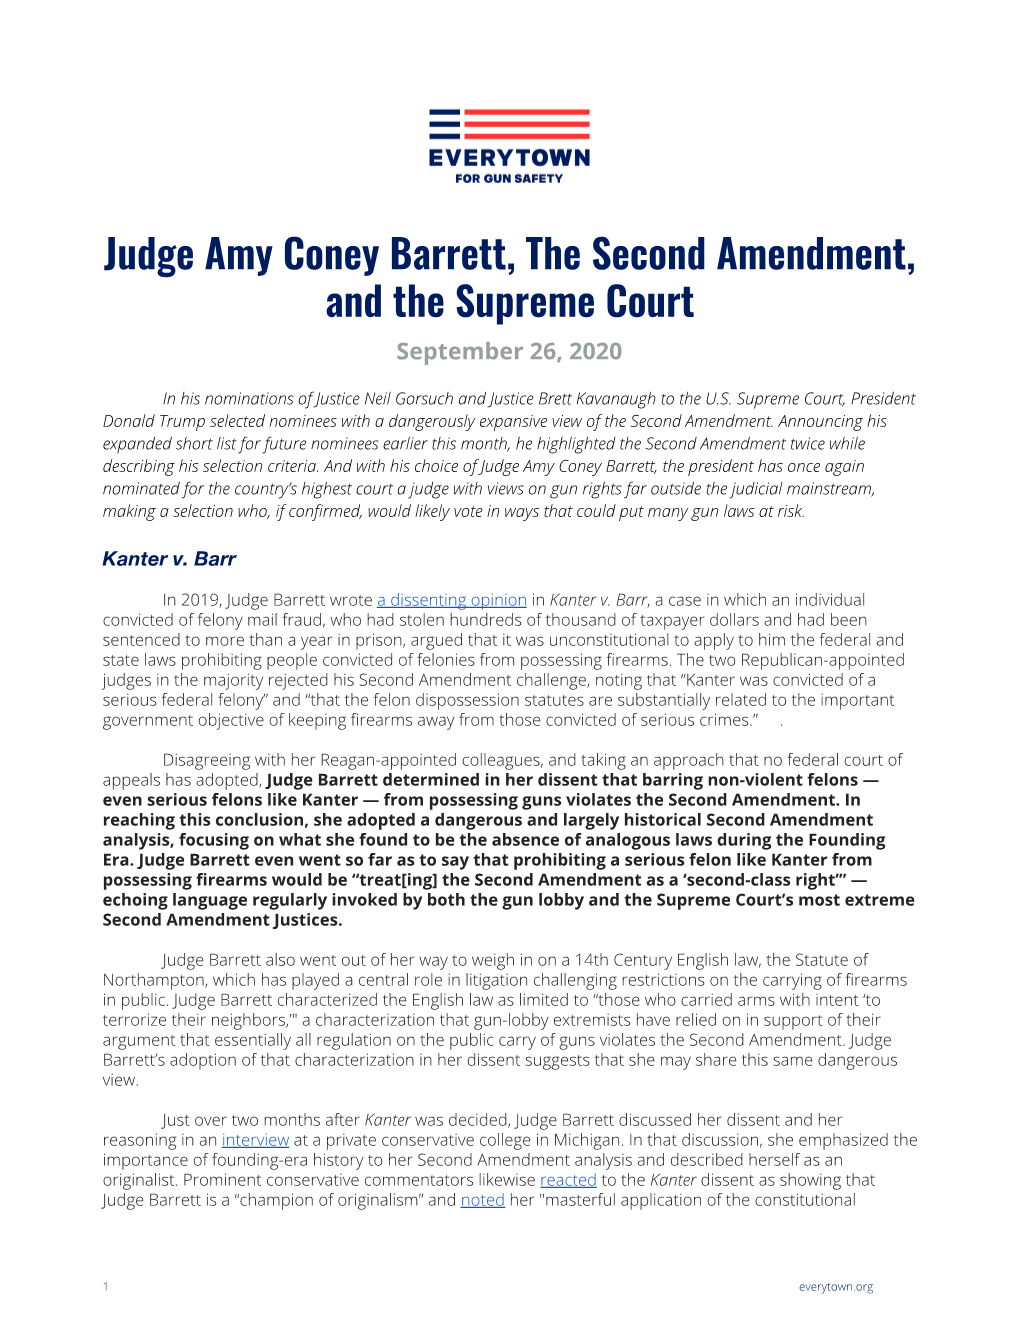 Judge Amy Coney Barrett, the Second Amendment, and the Supreme Court September 26, 2020